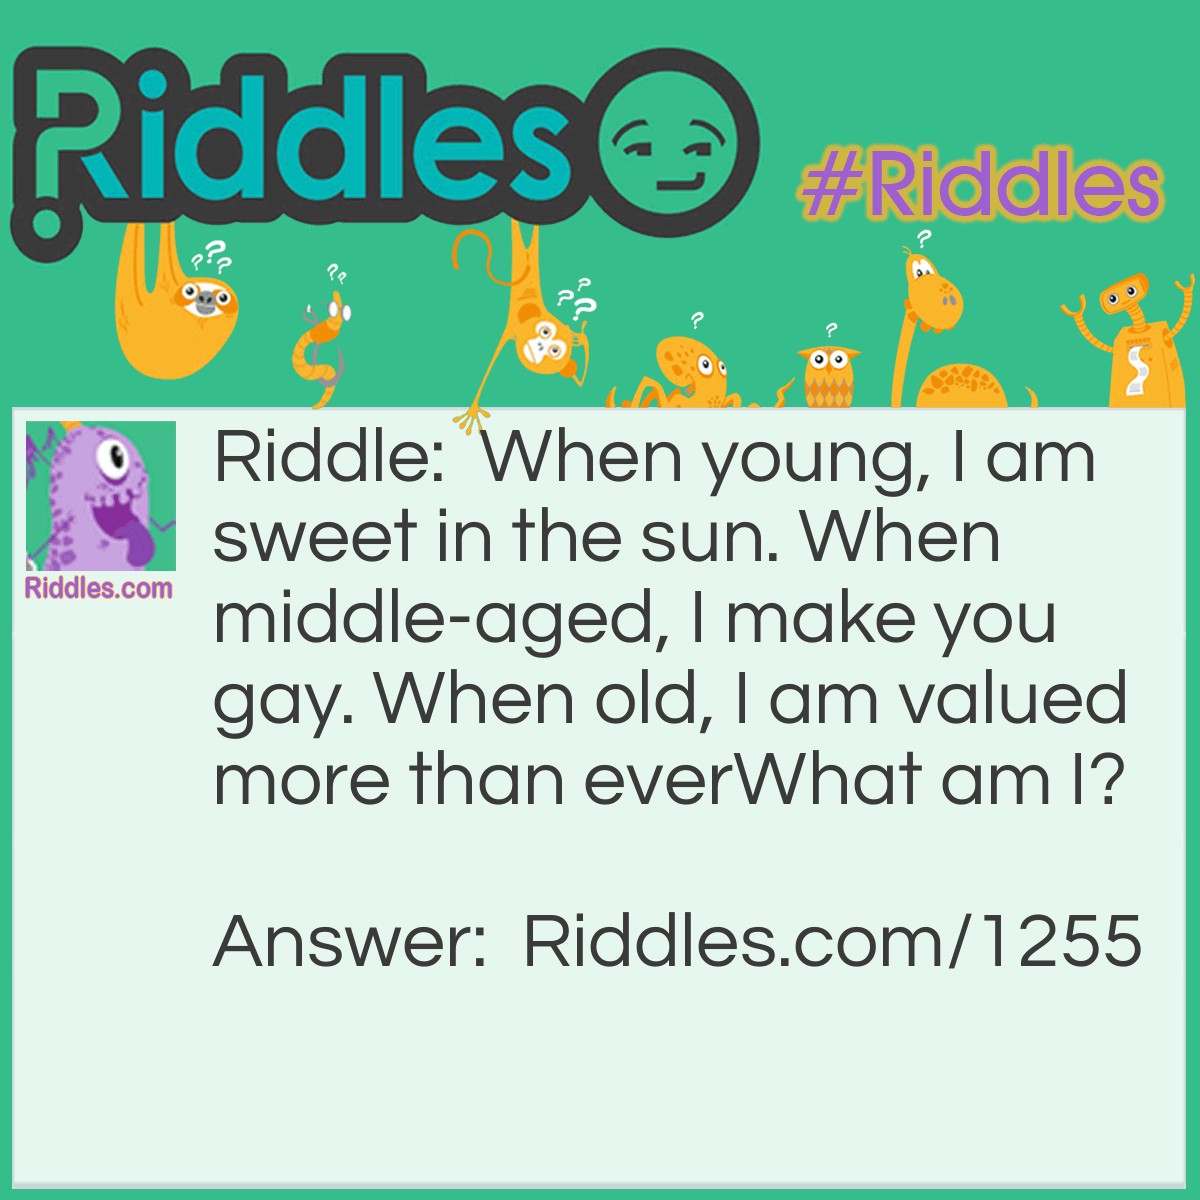 Riddle: When young, I am sweet in the sun. When middle-aged, I make you gay. When old, I am valued more than ever
What am I? Answer: Wine